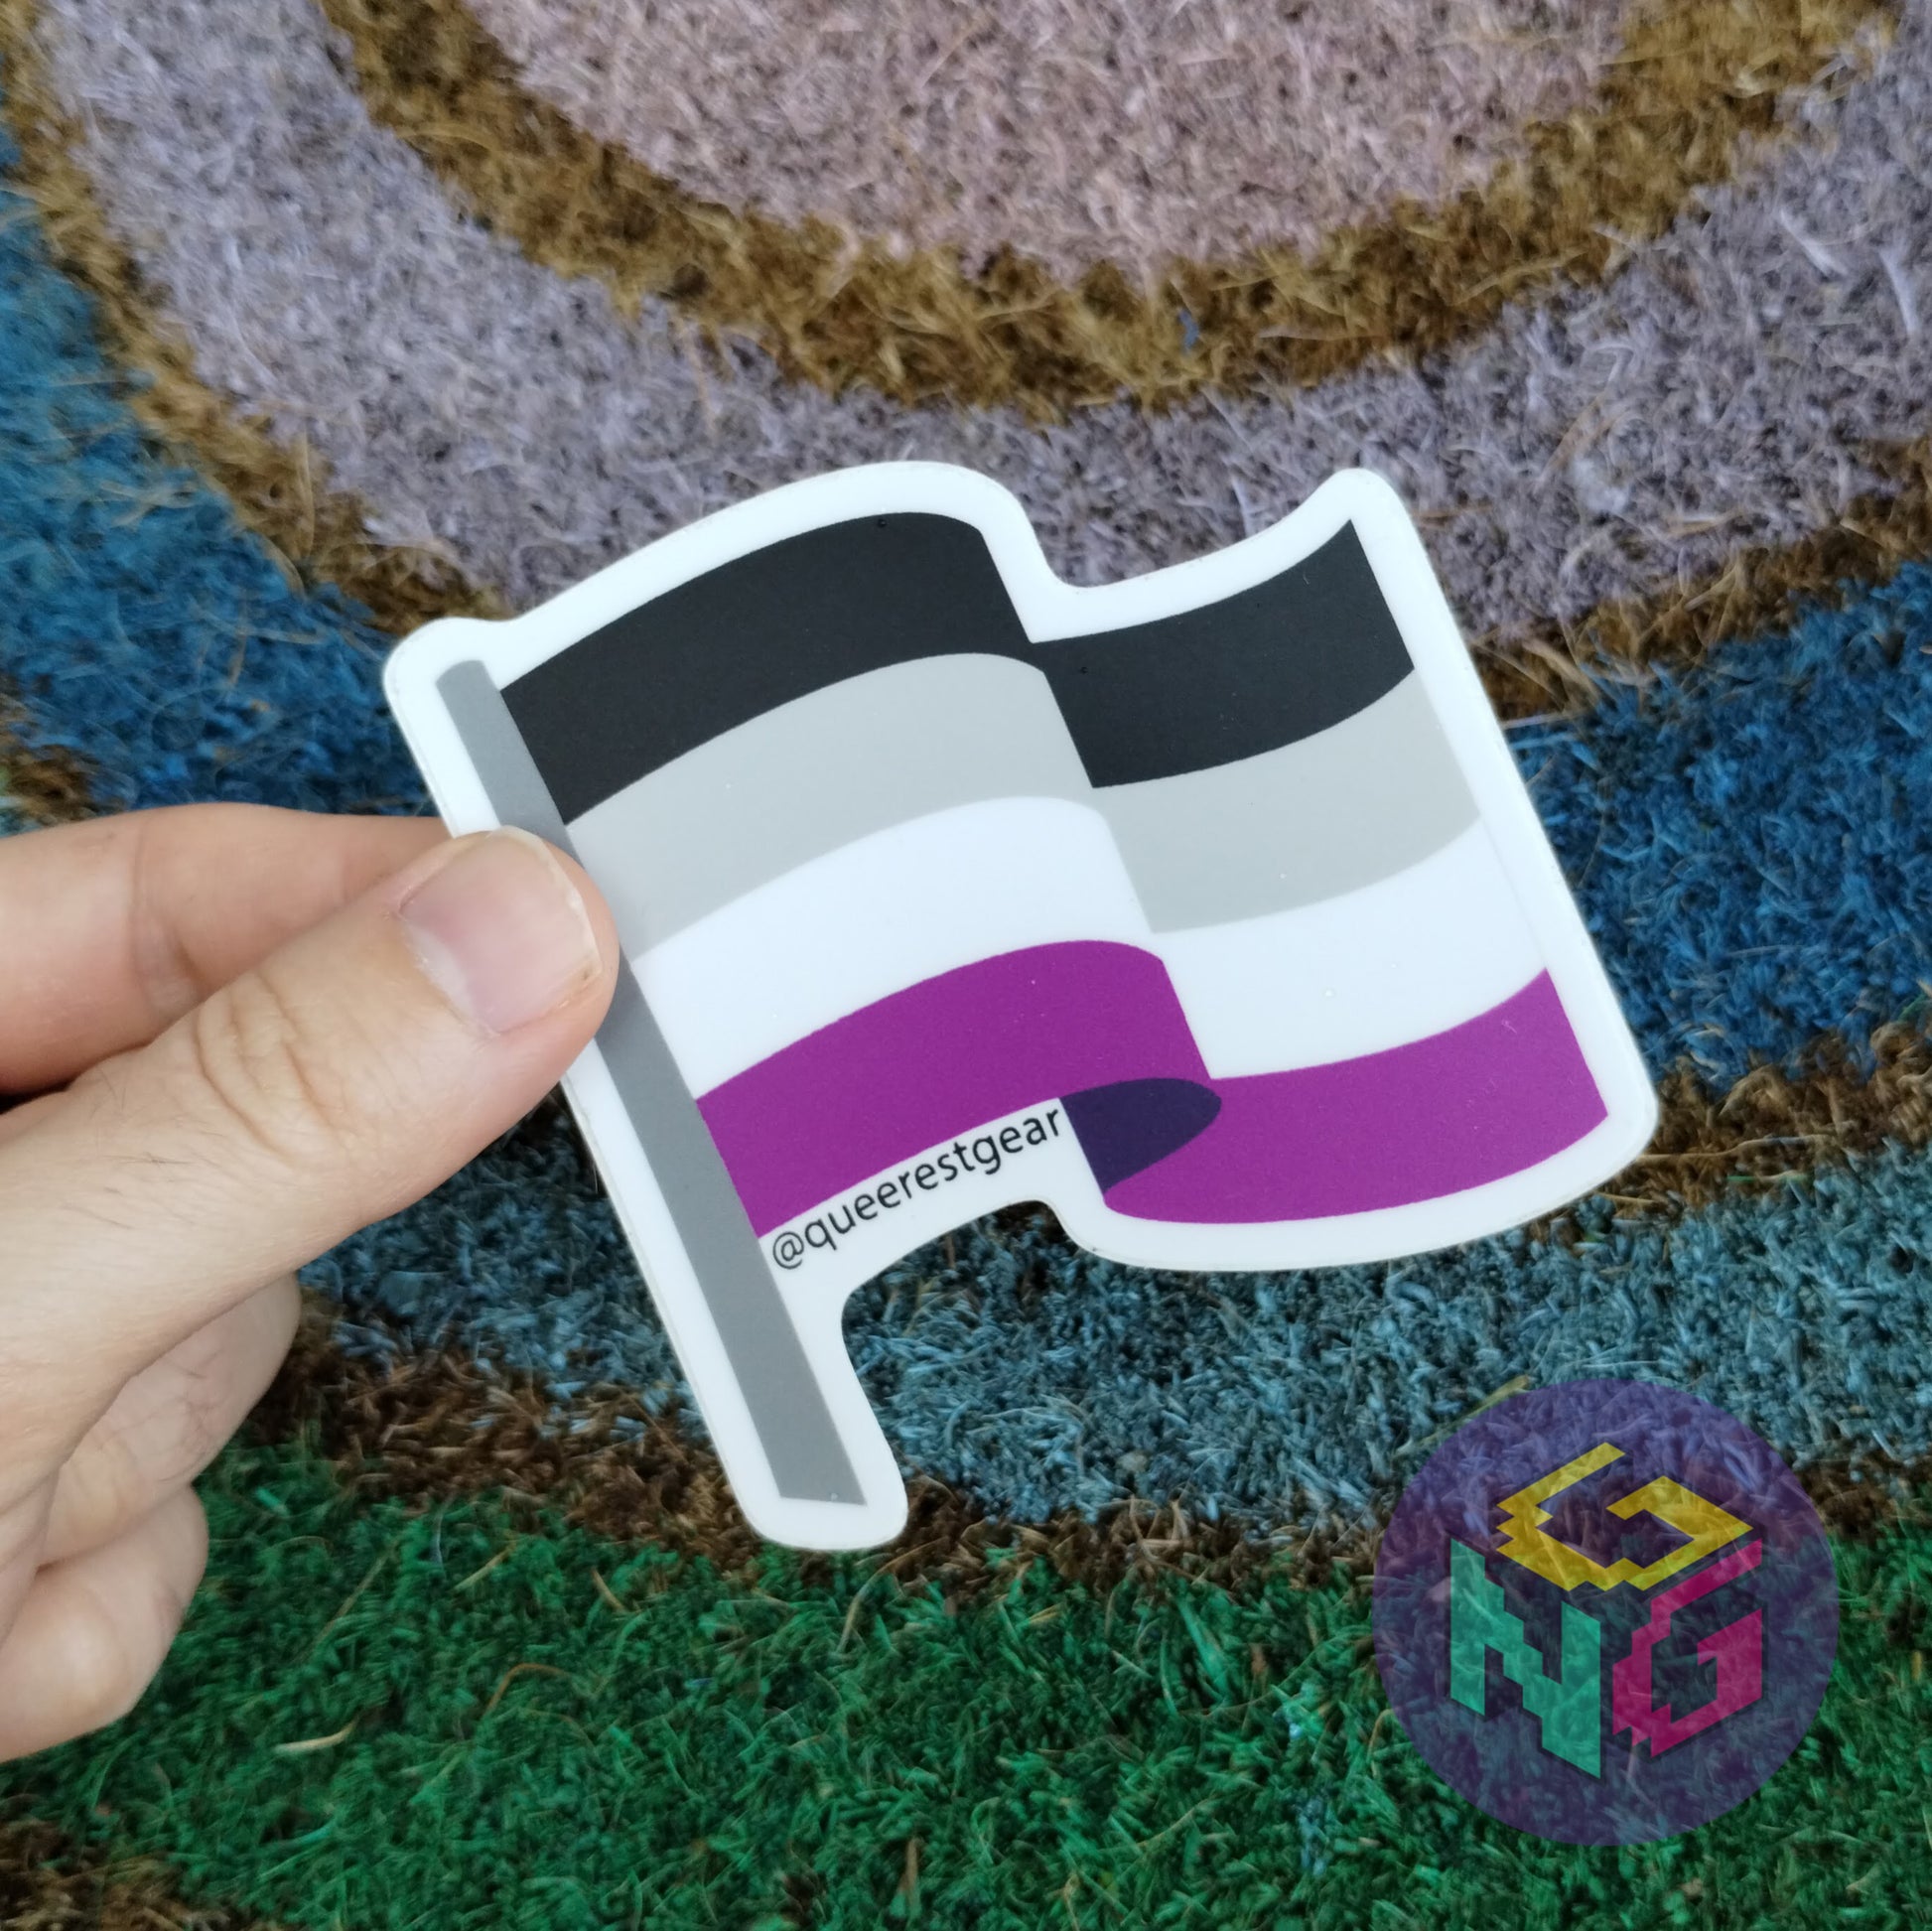 asexual flag sticker held in thumb and finger on rainbow welcome mat